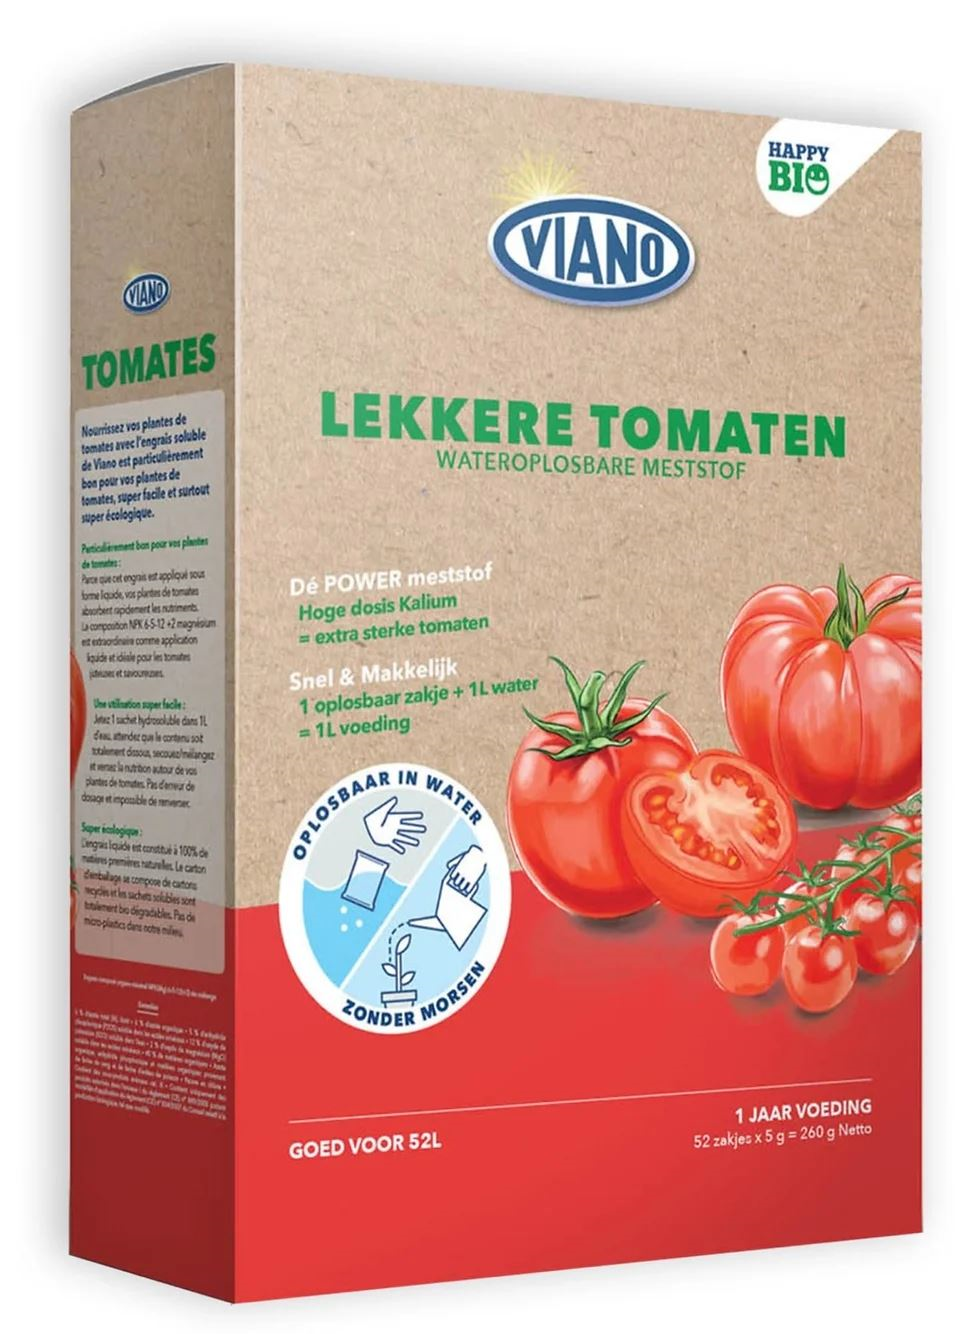 Organic water-soluble fertilizer for tomatoes